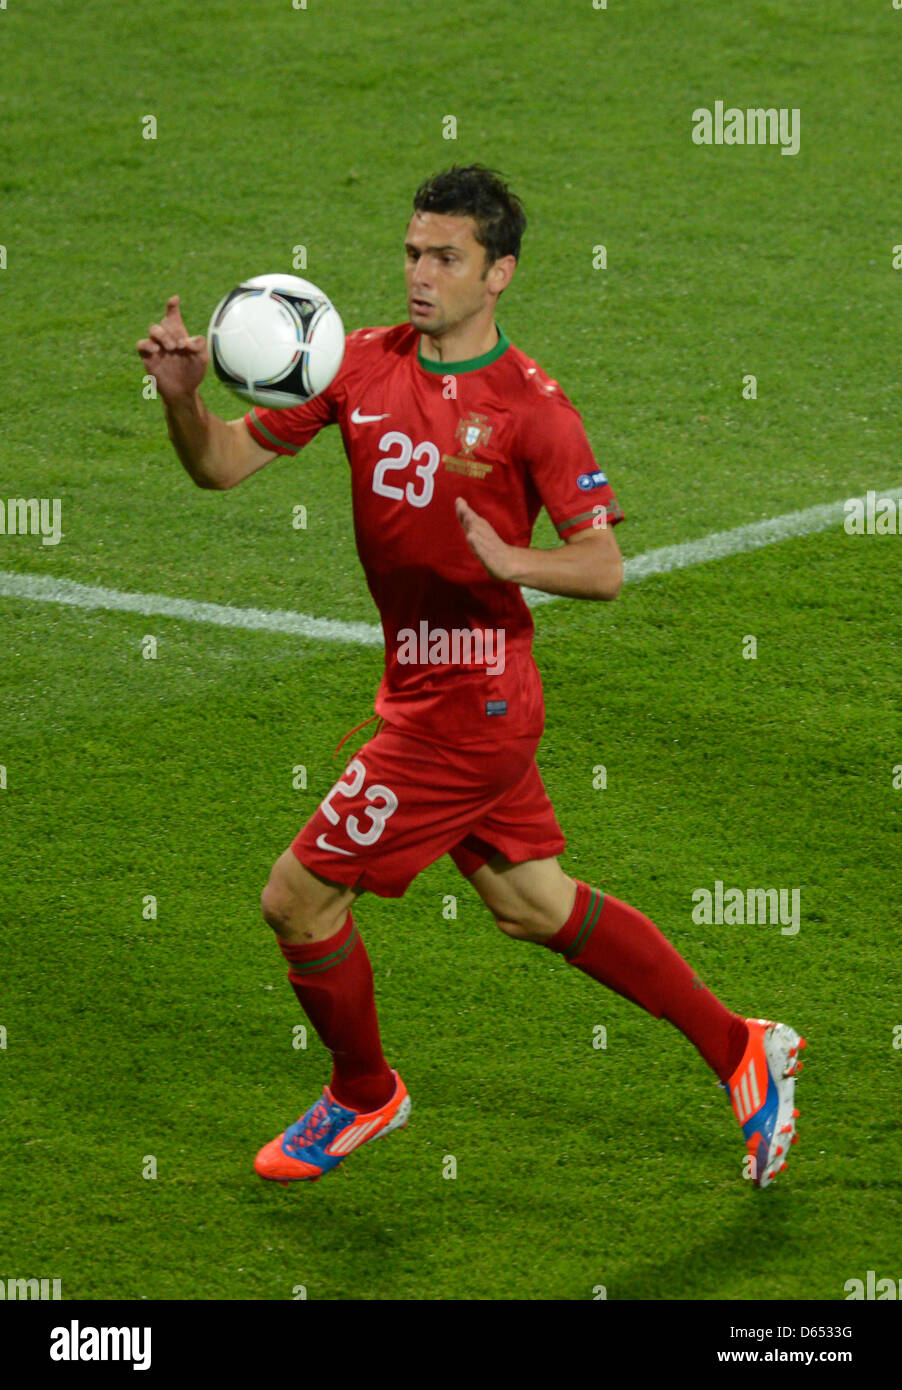 Portugal's Helder Postiga in action during UEFA EURO 2012 group B soccer match Germany vs Portugal at Arena Lviv in Lviv, the Ukraine, 09 June 2012. Photo: Marcus Brandt dpa (Please refer to chapters 7 and 8 of http://dpaq.de/Ziovh for UEFA Euro 2012 Terms & Conditions) Stock Photo